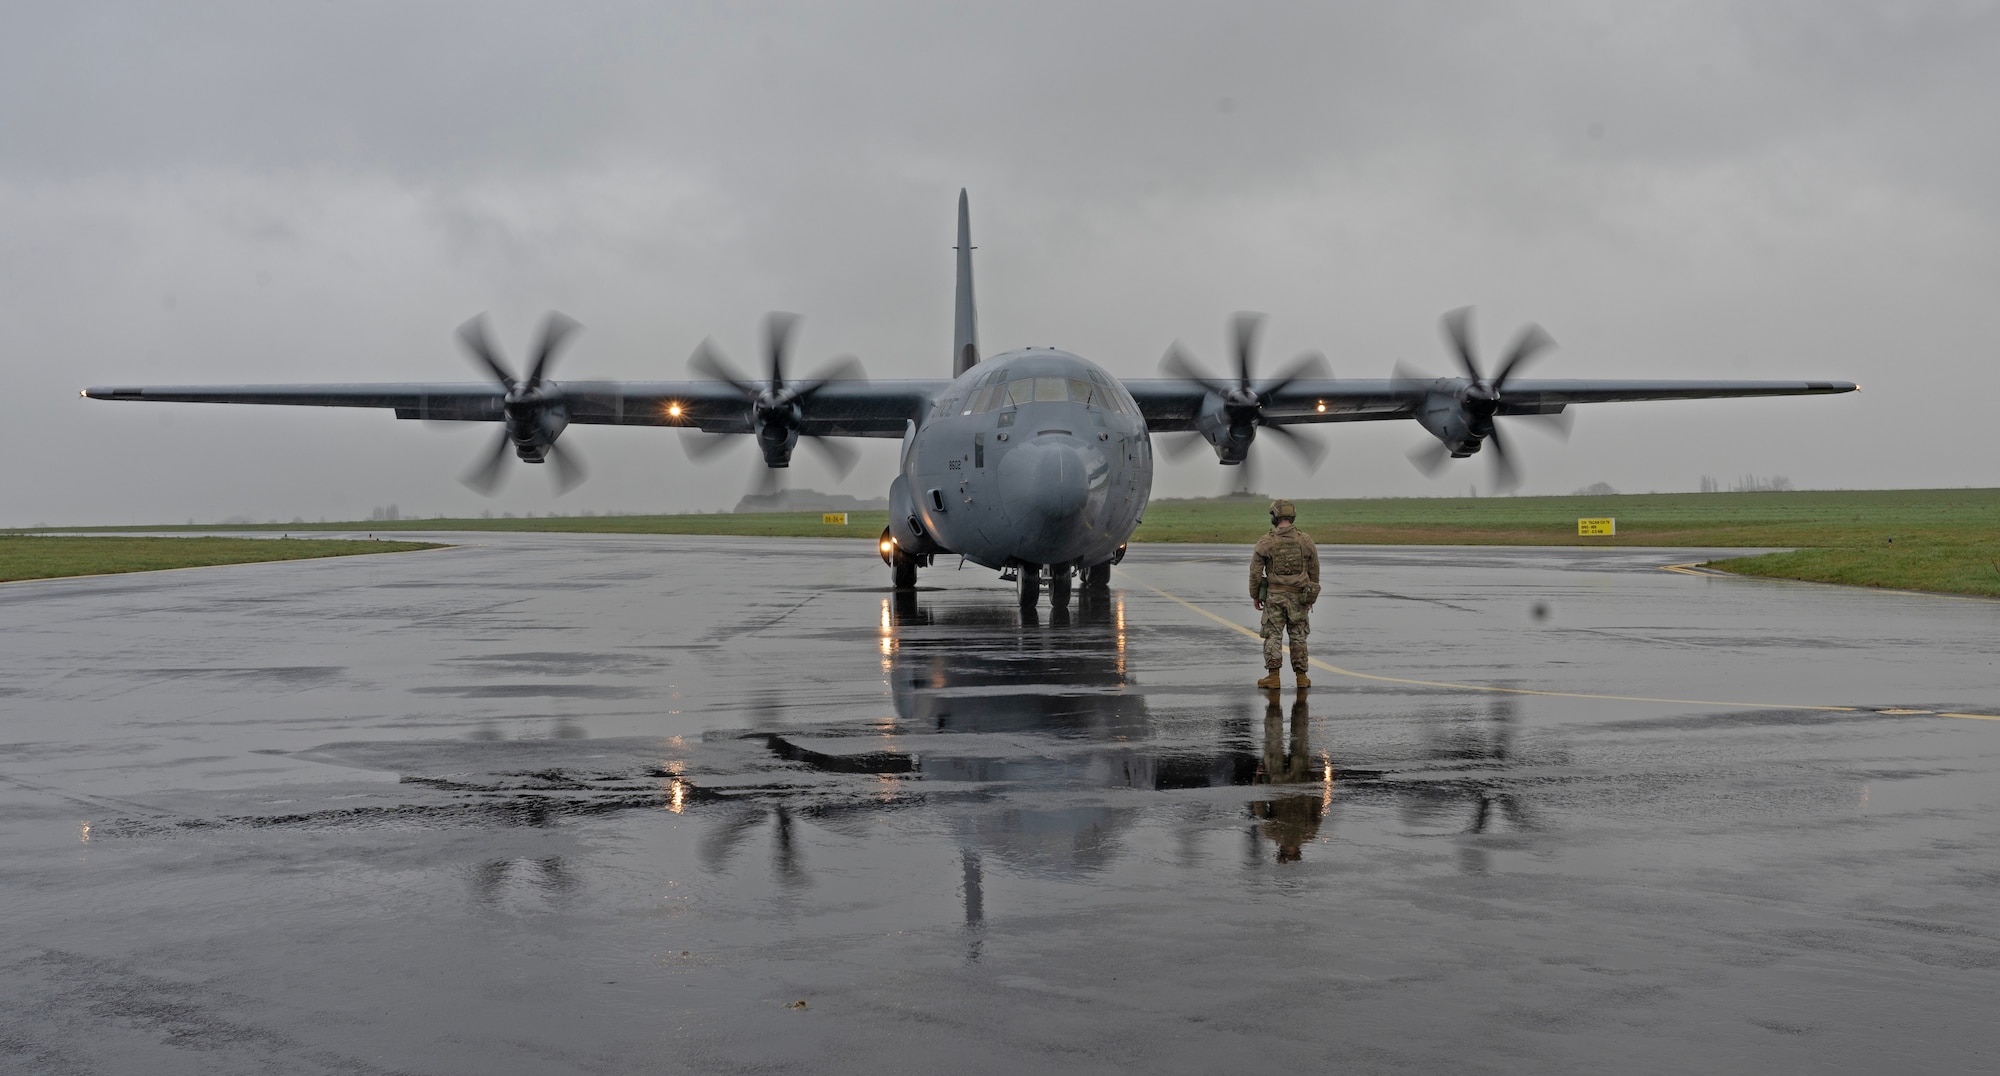 U.S. Air Force Staff Sgt. David Adams, 435th Contingency Response Squadron contingency response aerospace maintenance journeyman, marshals a C-130J Super Hercules cargo aircraft assigned to Ramstein Air Base, Germany, at Chièvres Air Base, Belgium, during Exercise Agile Bison, March 9, 2023.